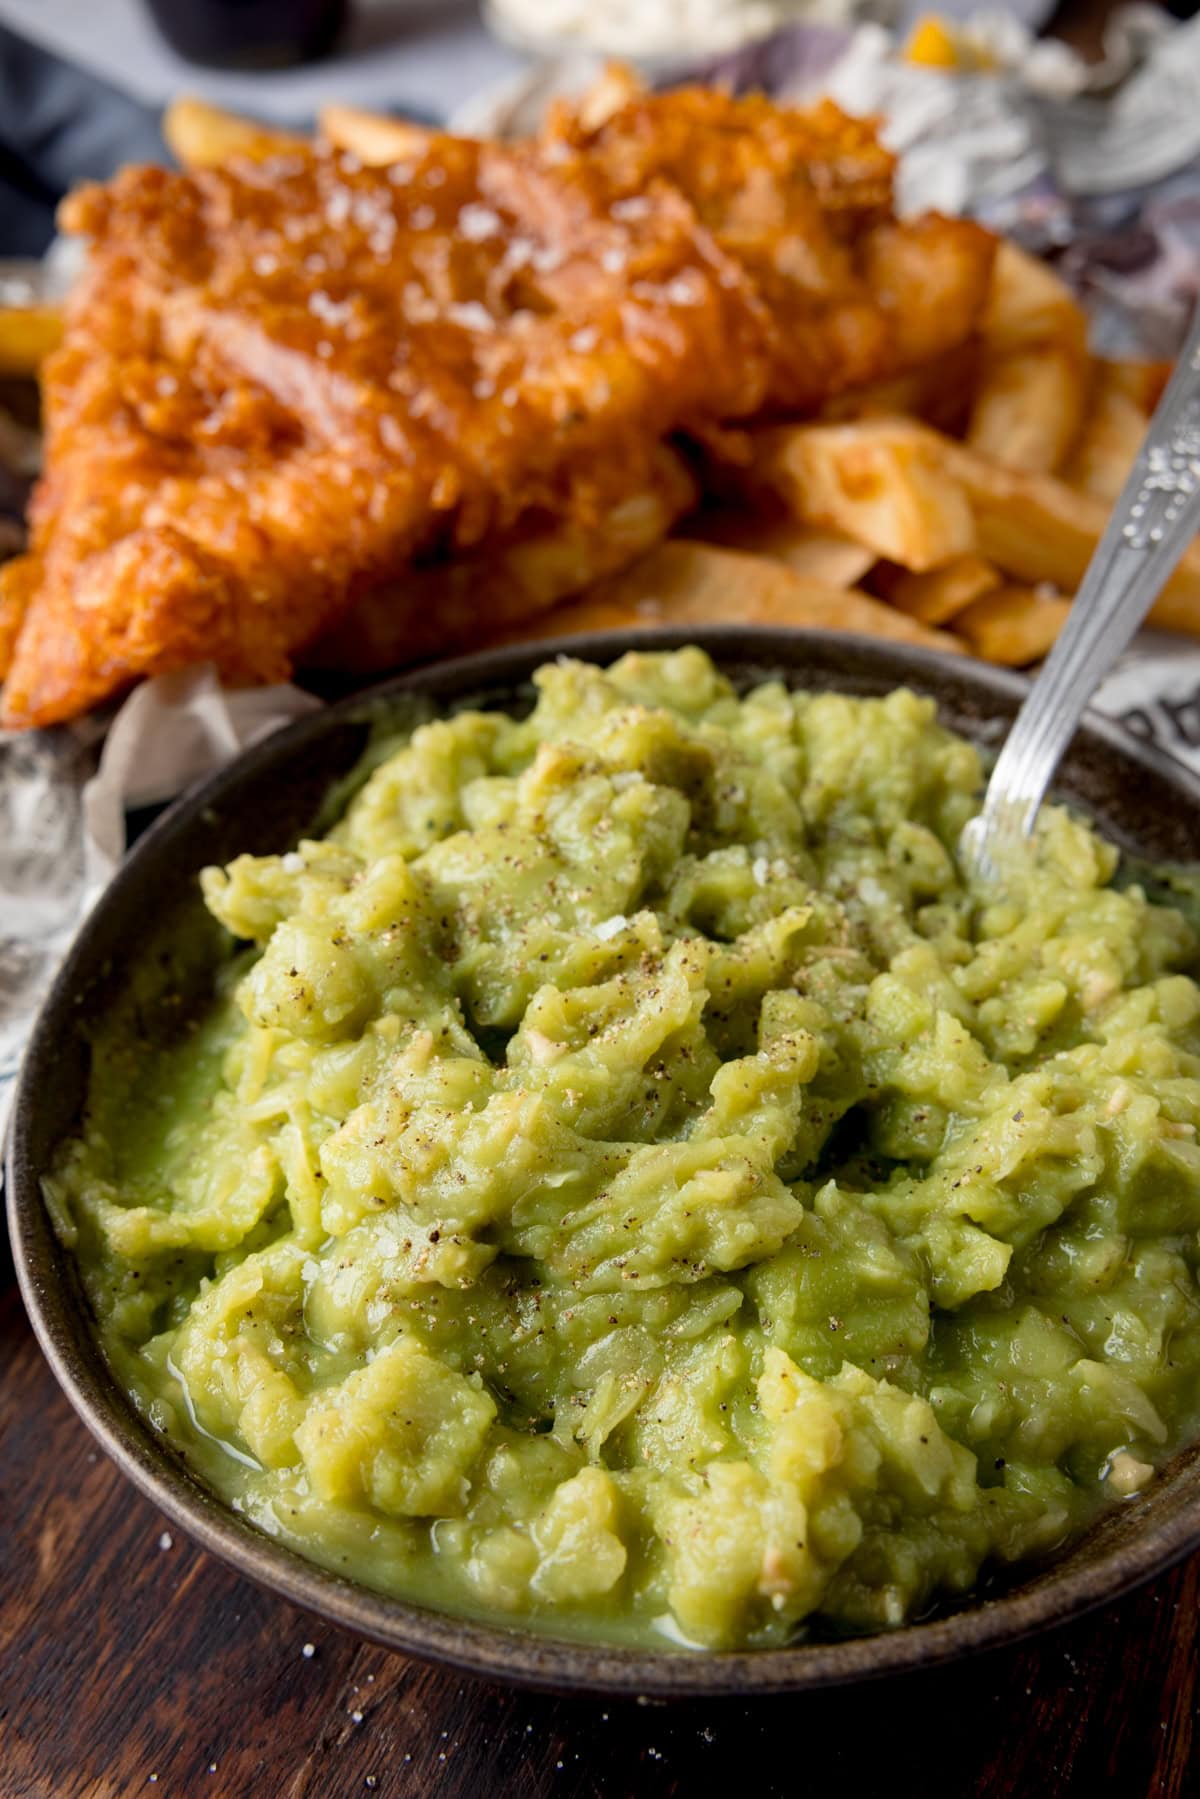 A tall image of mushy peas in a black bowl, with a silver spoon sticking out of it. In the background you can see chip shop style fish and chips on some newspaper. This is on a dark wooden board.